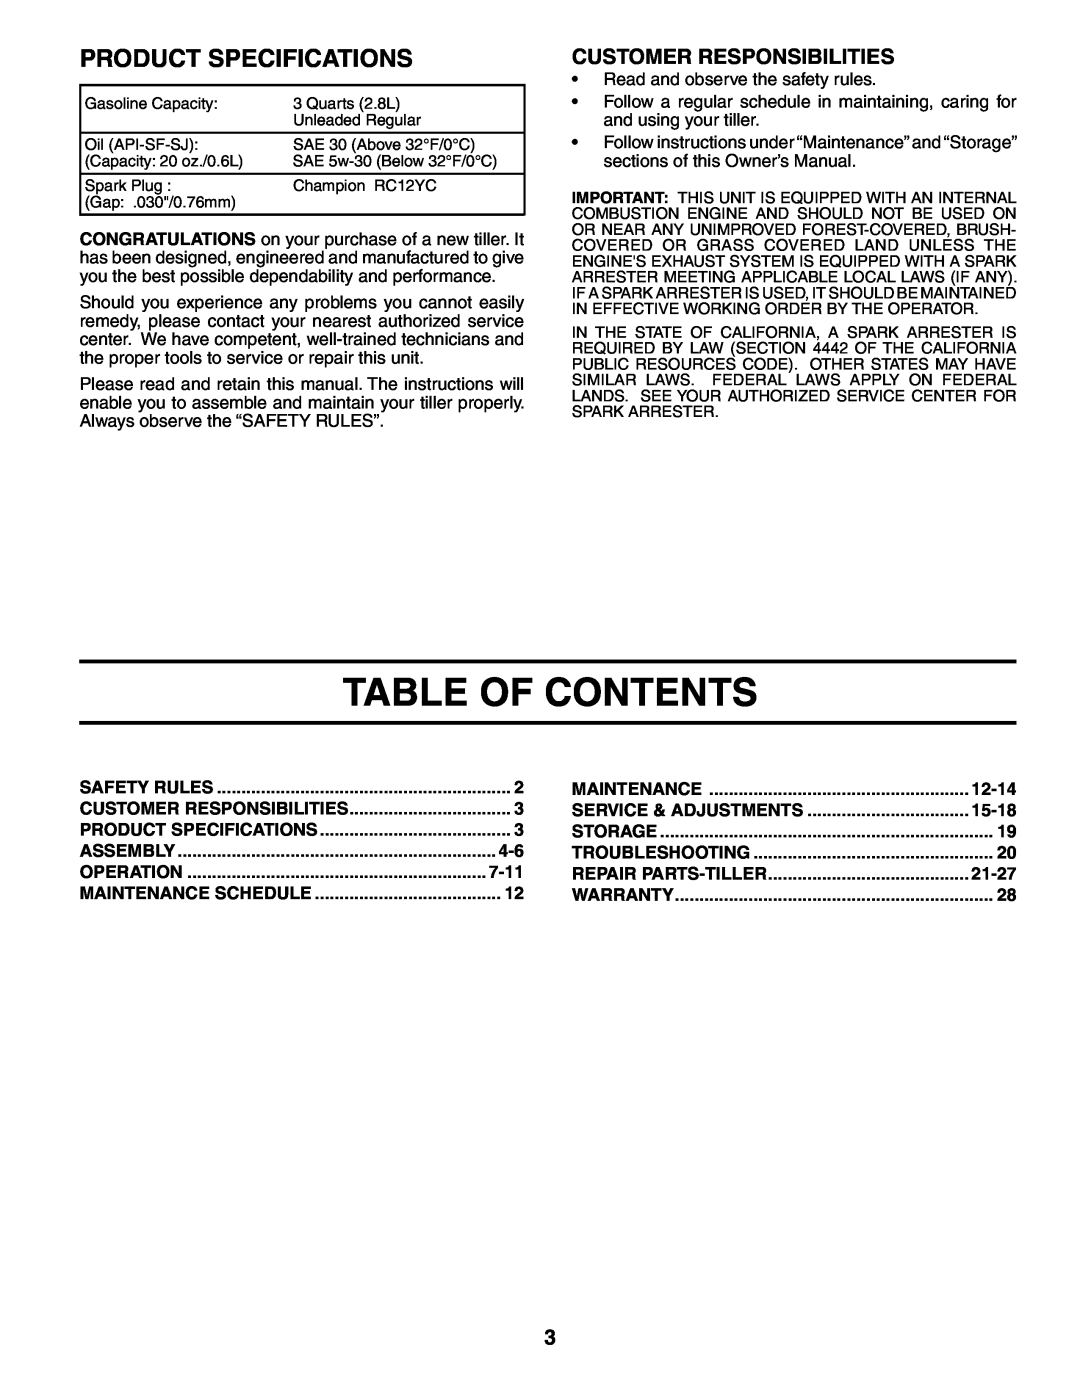 Poulan MRT500 owner manual Table Of Contents, Product Specifications, Customer Responsibilities, 7-11, 12-14, 15-18, 21-27 